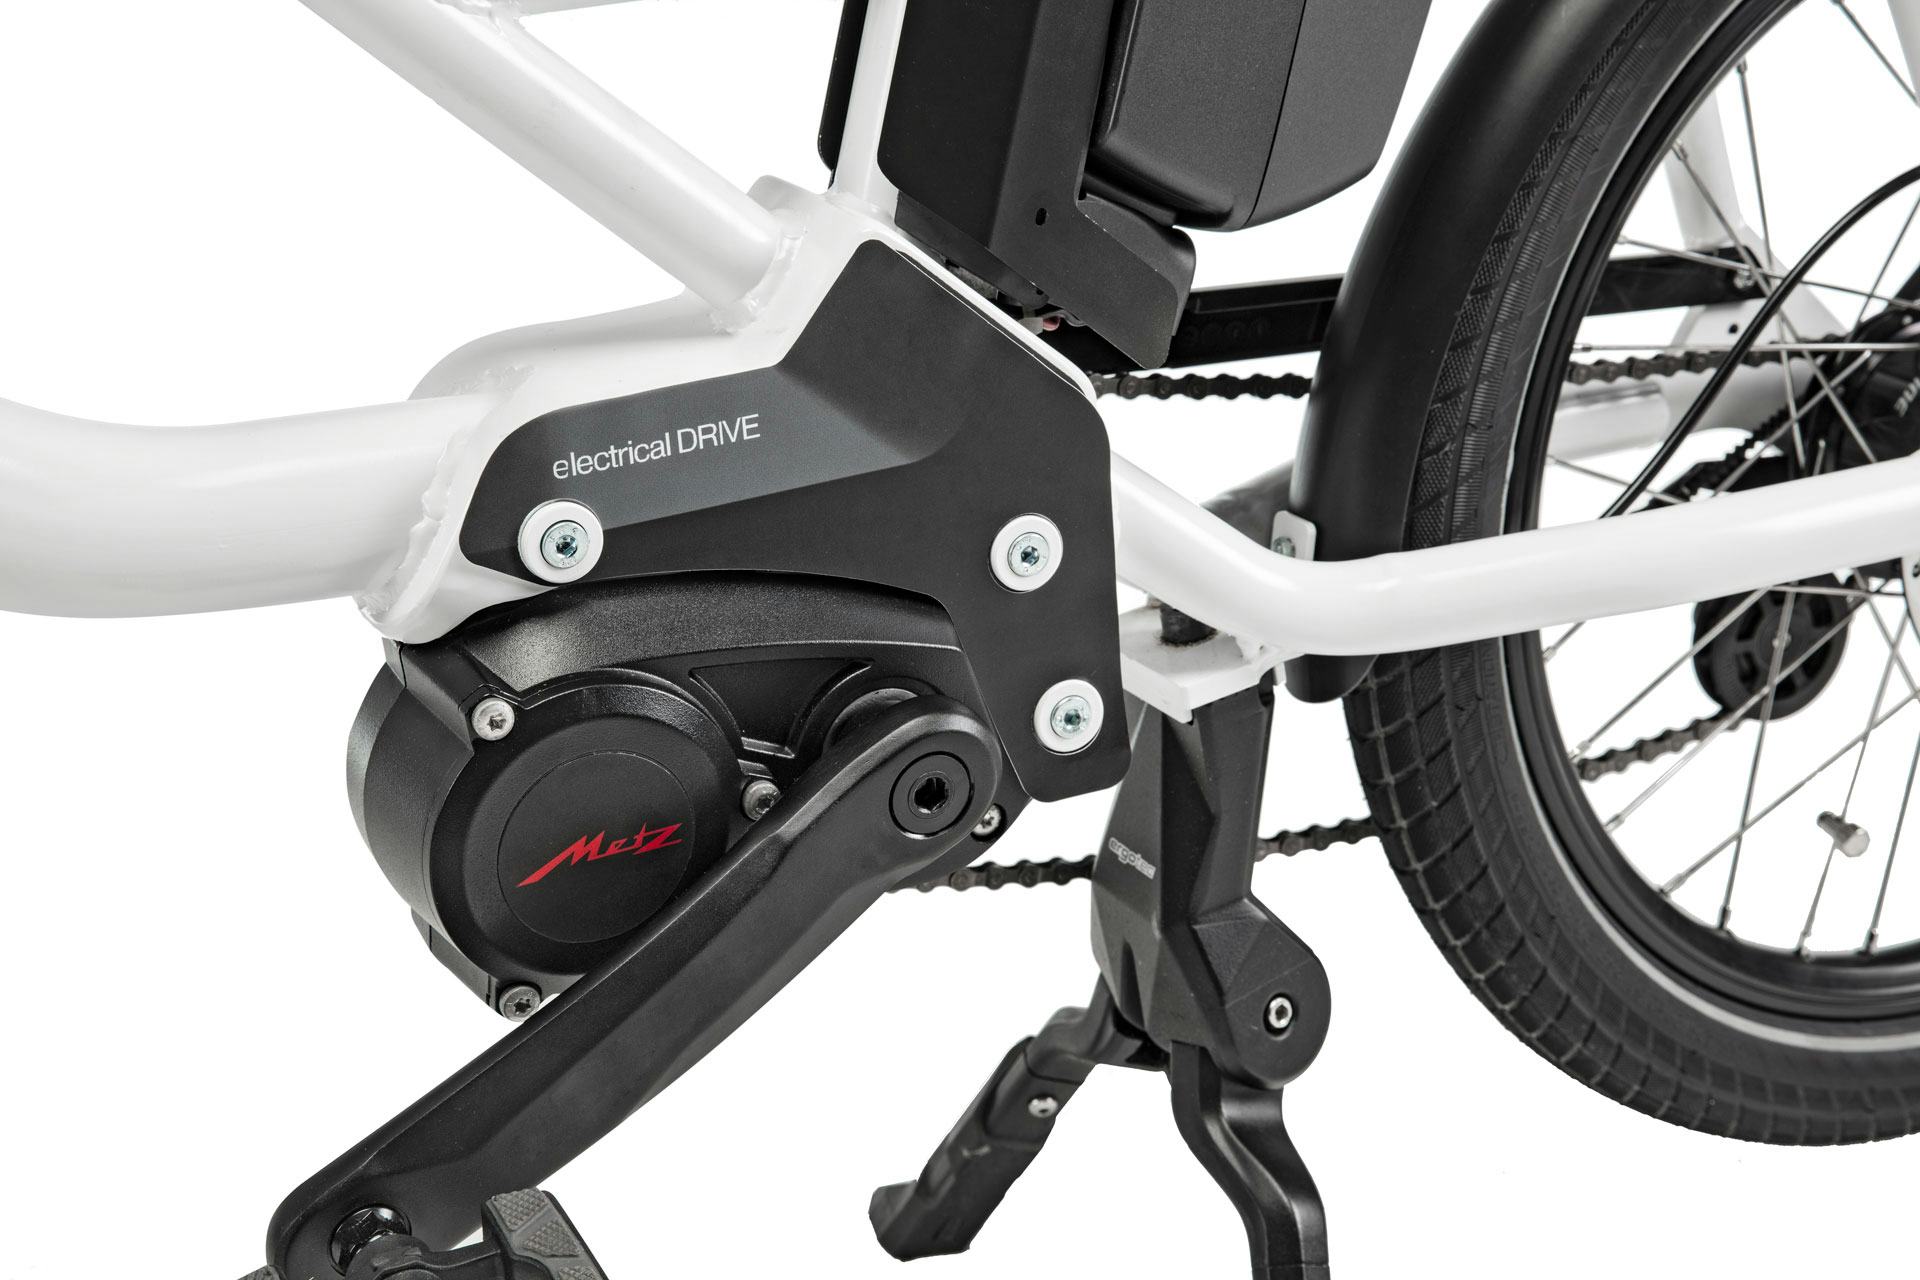 The E-Packr comes with the compact 250W mid motor Metz G8. – Photo Metz Mobility